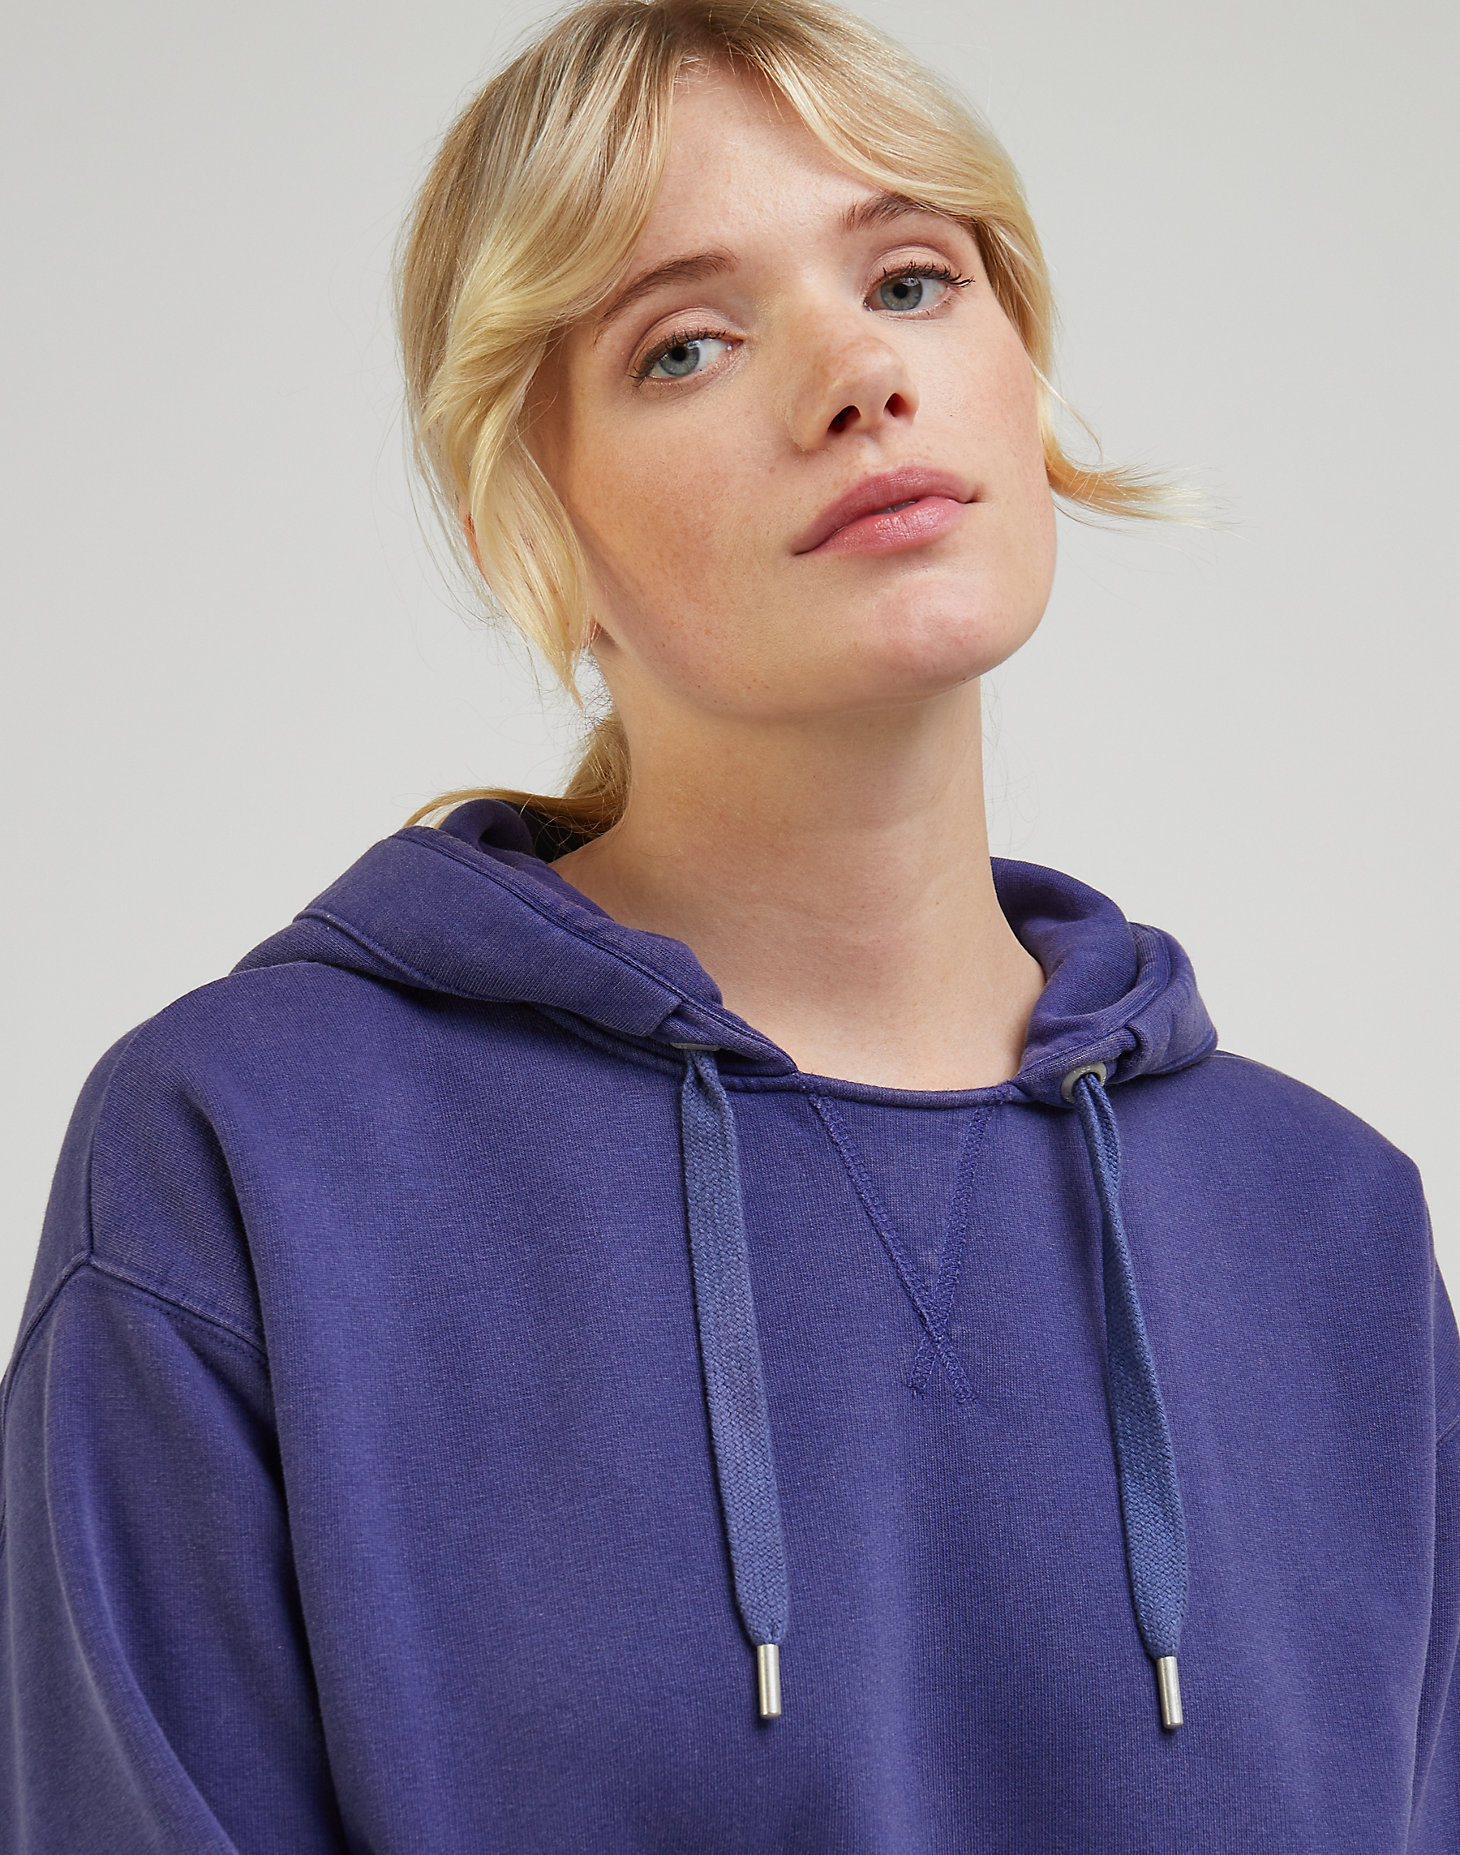 Relaxed Hoodie in Blueberry alternative view 4